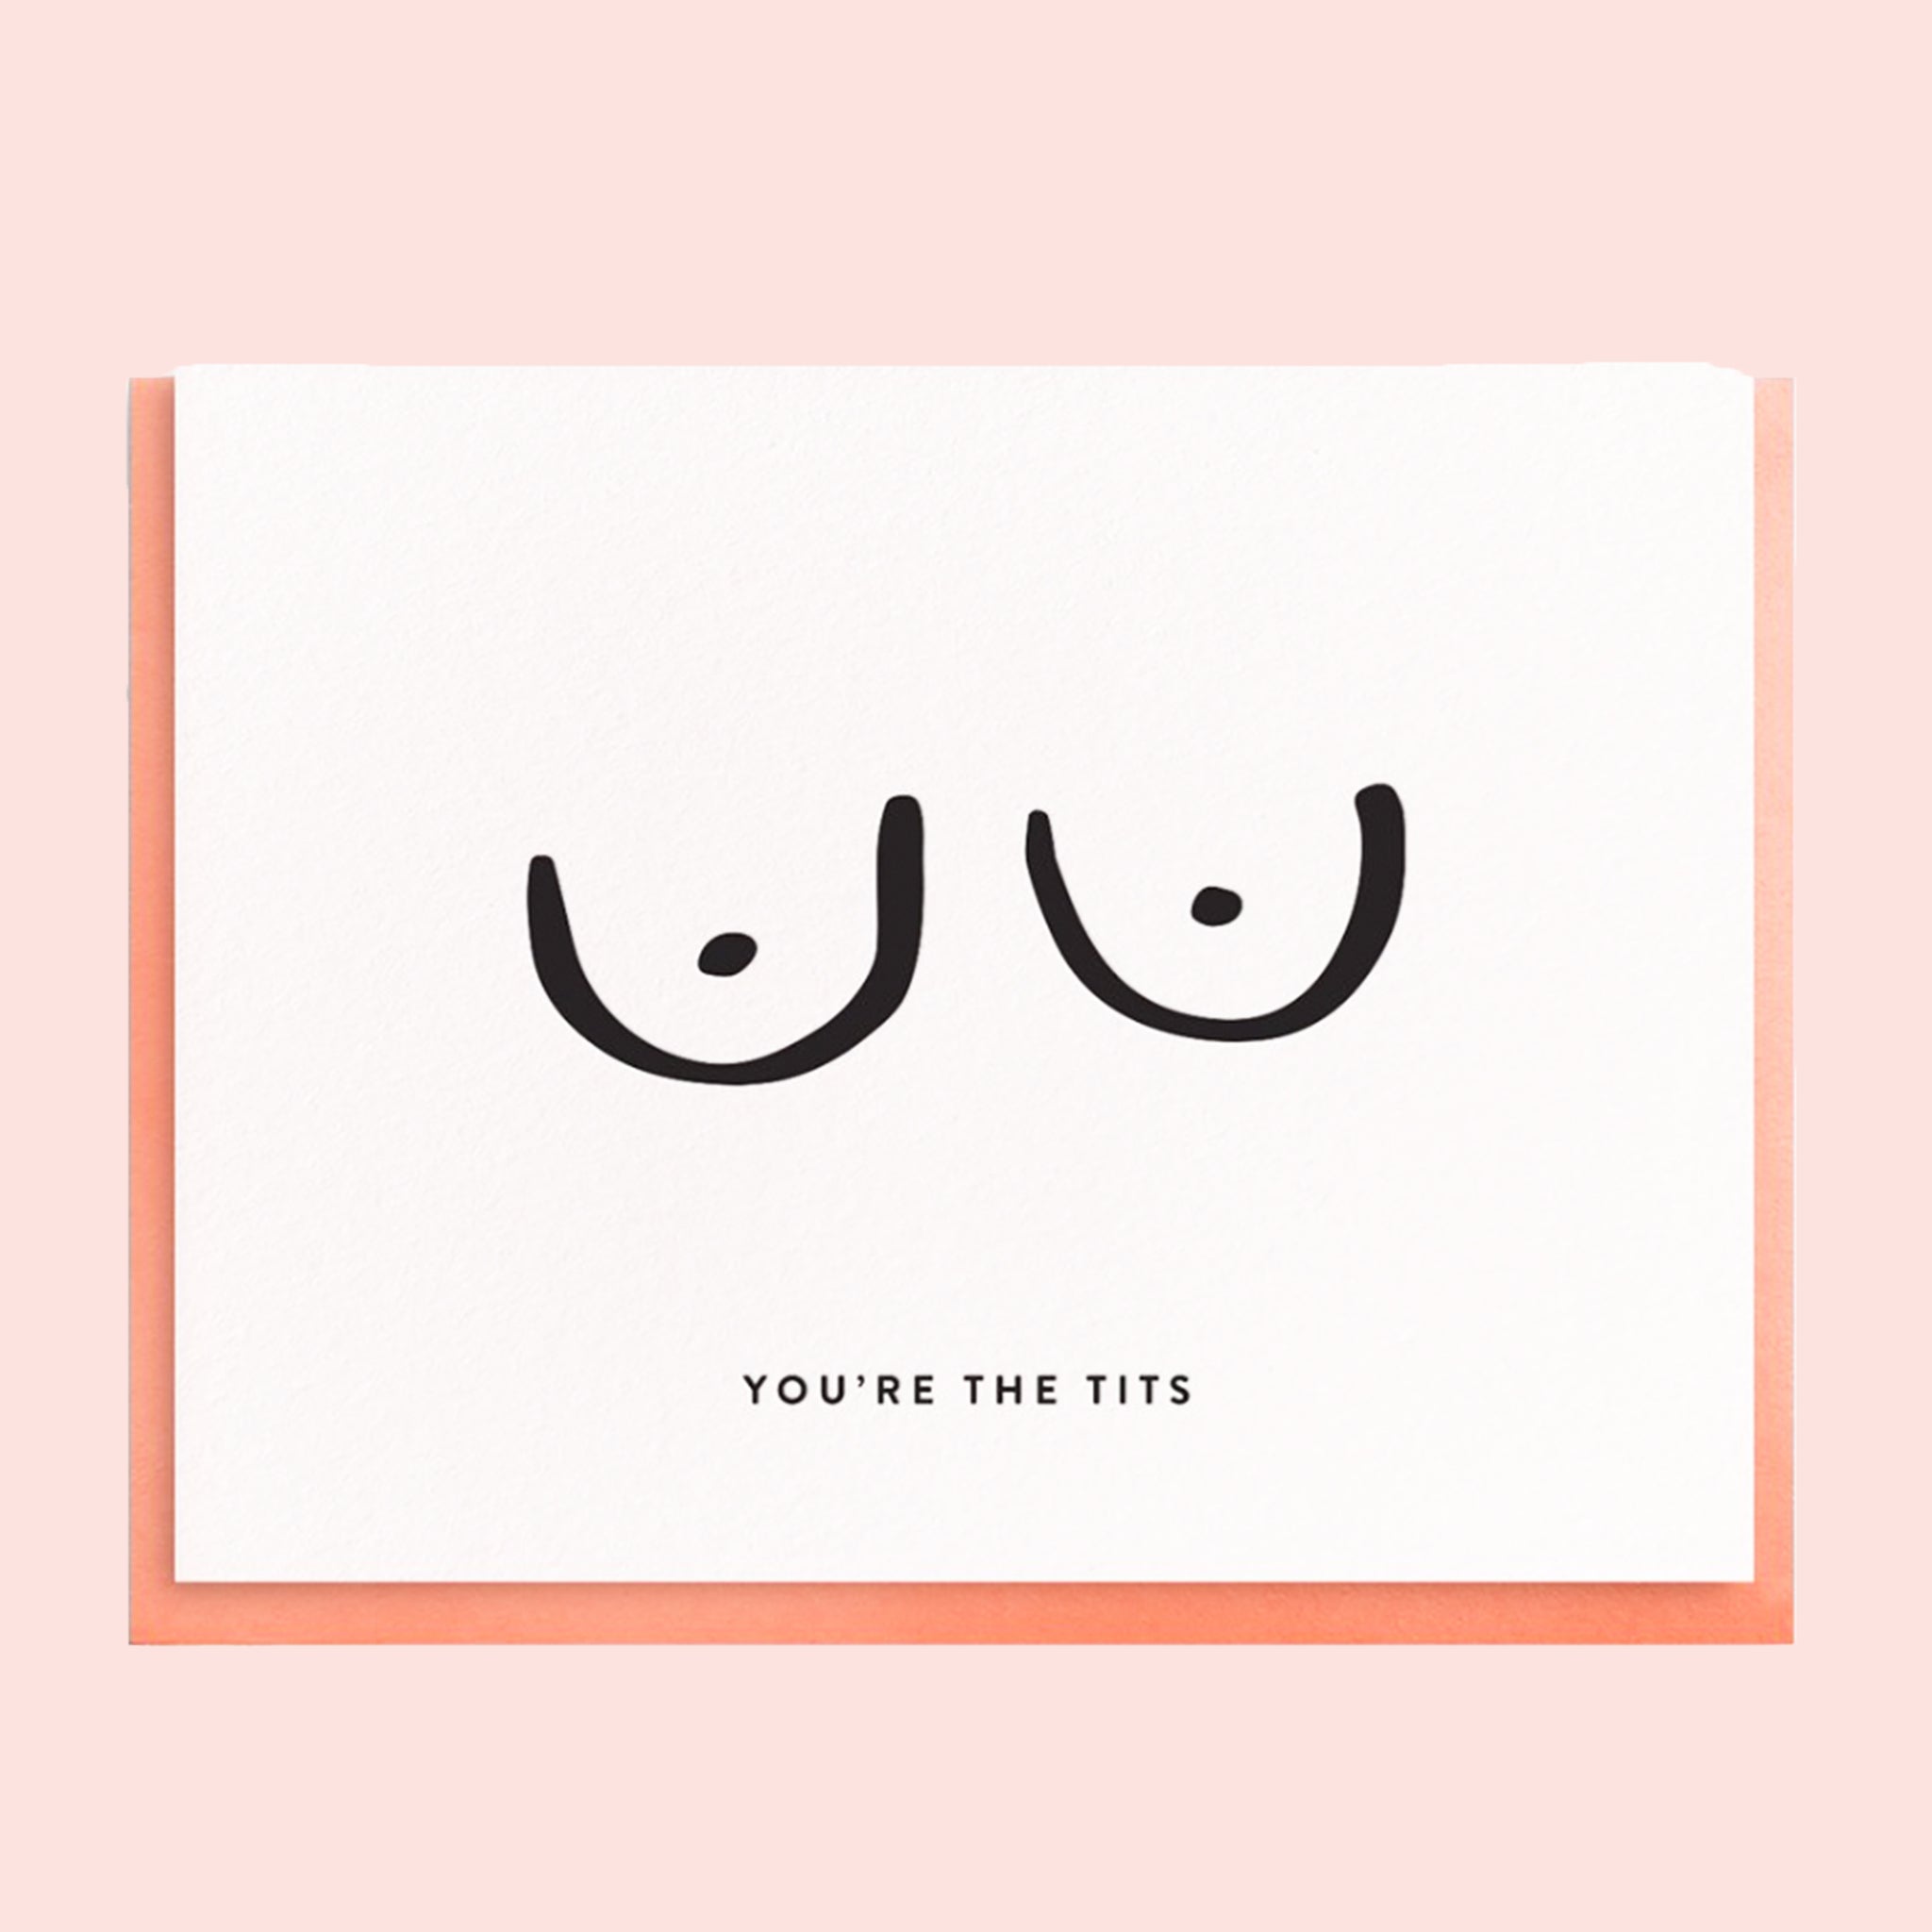 "You're the tits" with illustrated breasts accompanied by a light pink envelope.